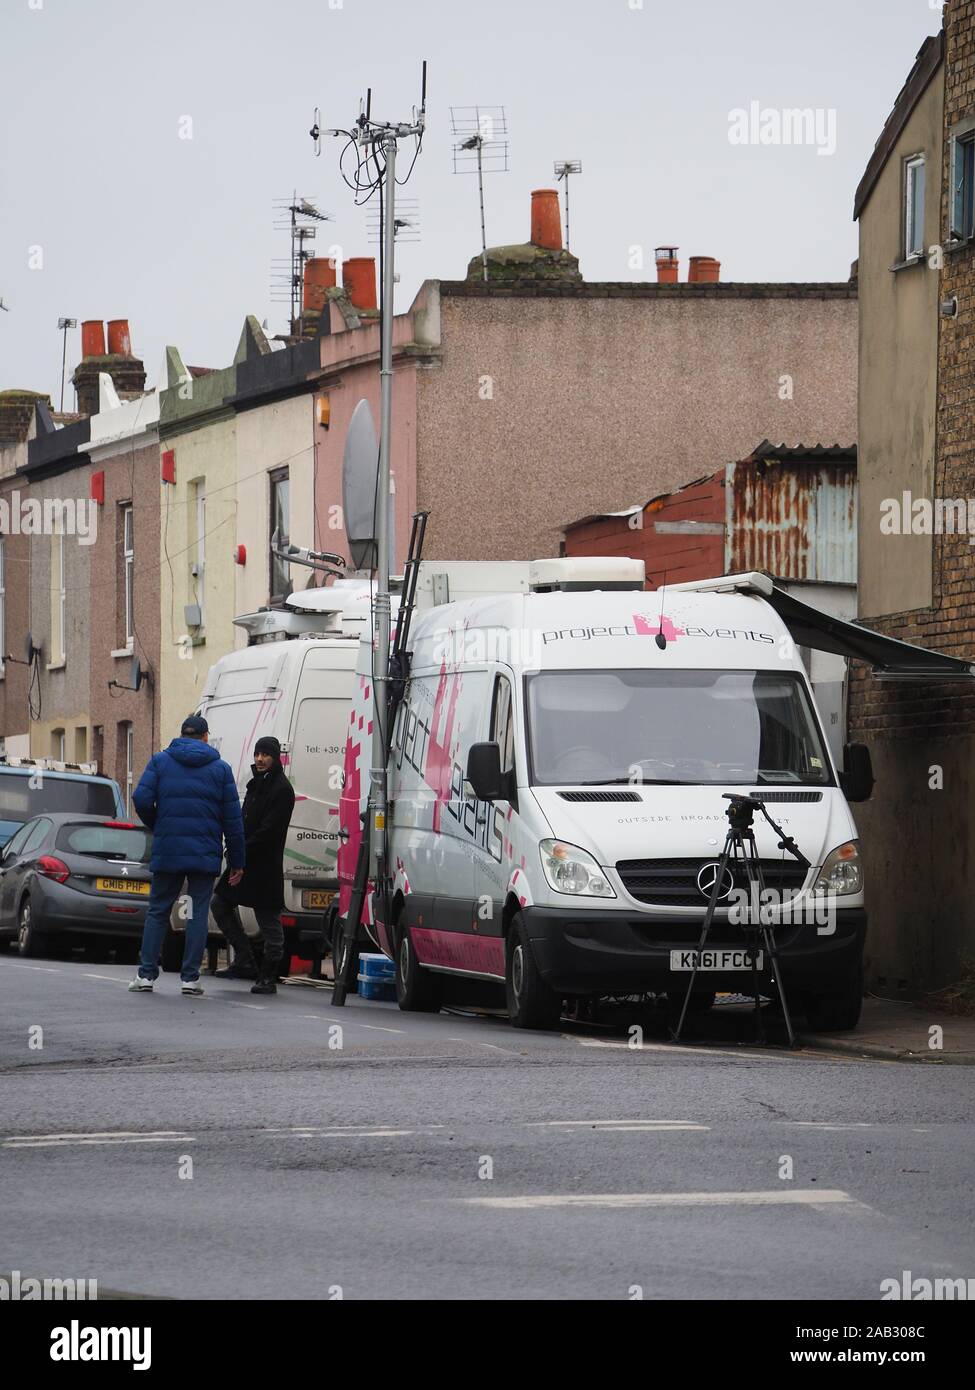 Sheerness, Kent, UK. 25th November, 2019. BBC Victoria Derbyshire live broadcast from Victoria Street, Sheerness. Victoria finds out what it will take to win the votes of the 40,000 people who live on the Isle of Sheppey. Credit: James Bell/Alamy Live News Stock Photo